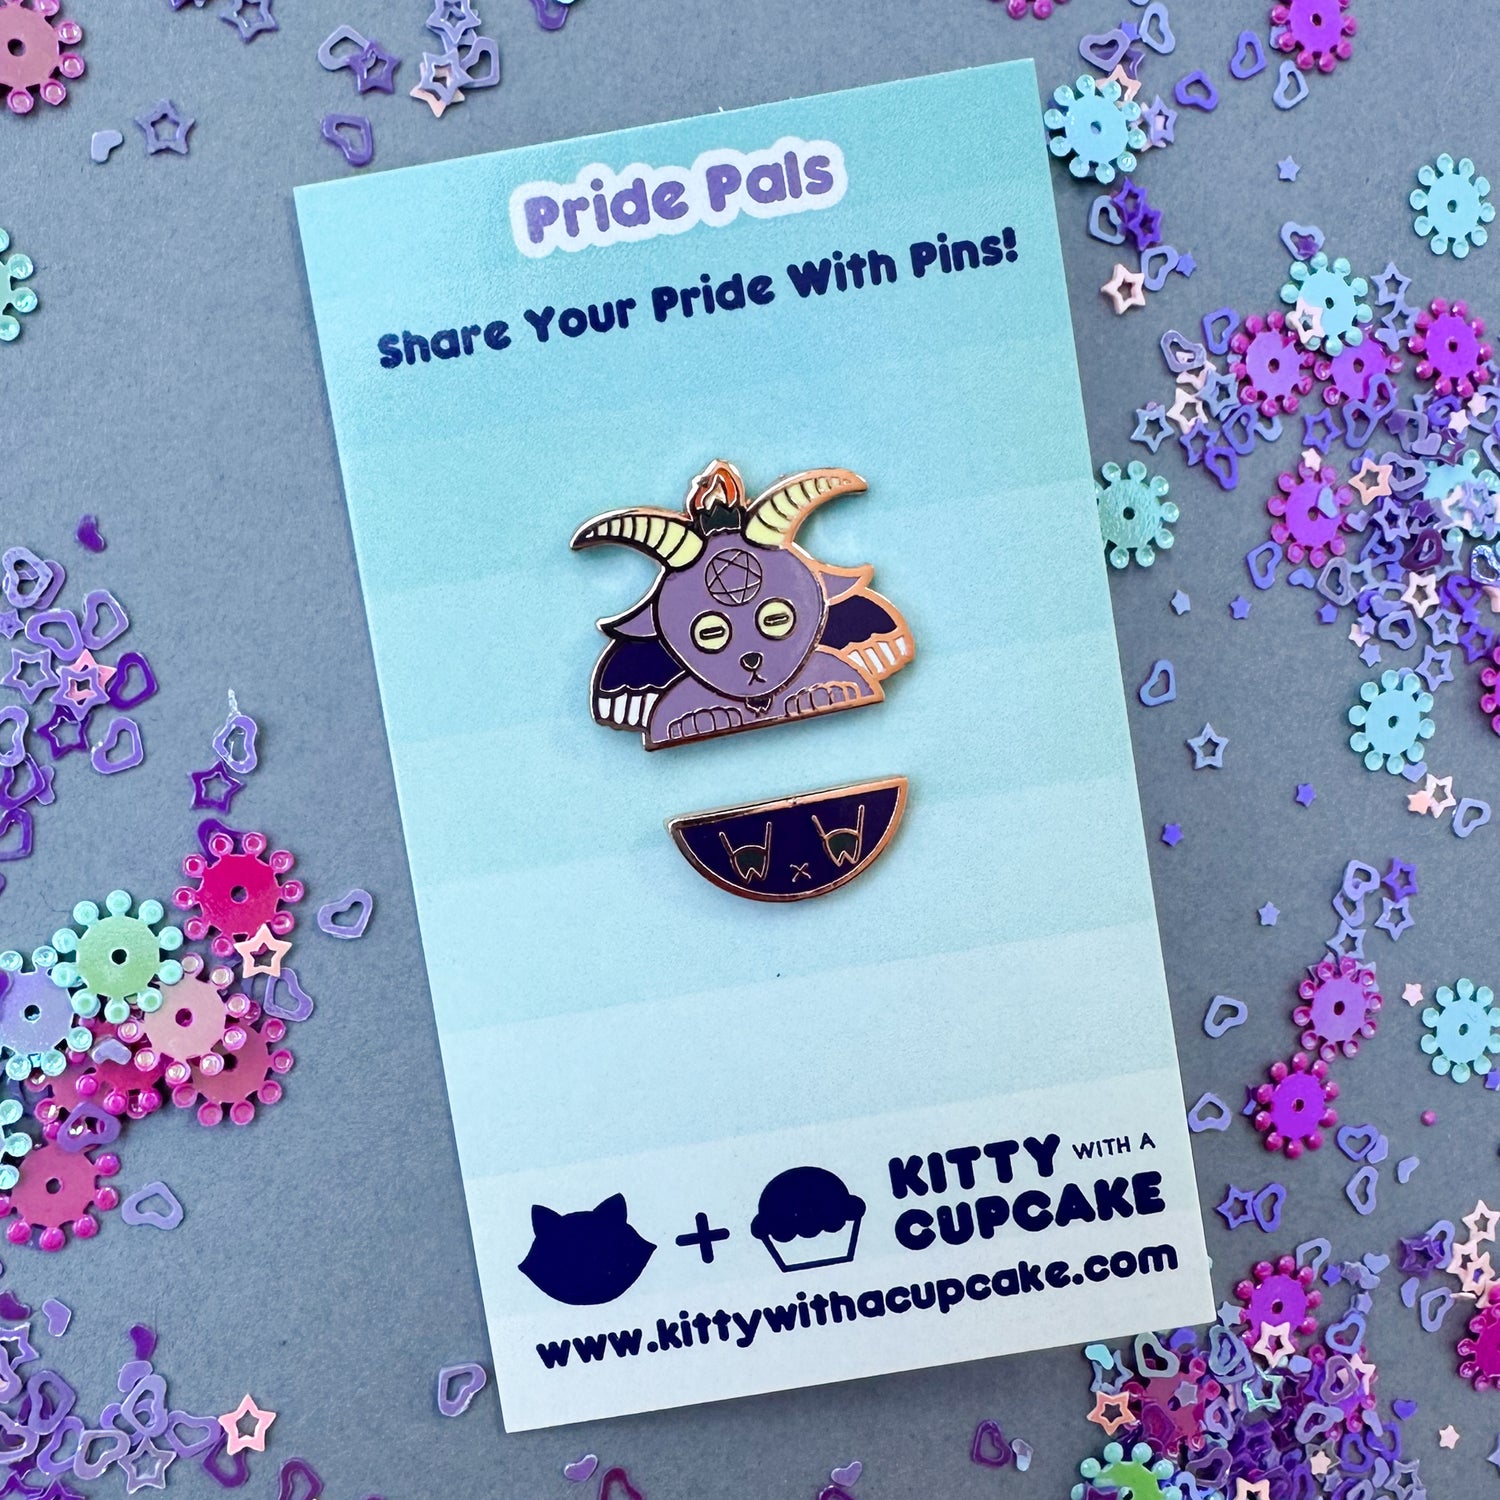 A card that reads "Pin Pals" with two pins representing Baphomet as if he was cut in half horizontally, one pin is the head and torso and the other is the butt and legs. The background is grey with purple, pink and blue confetti glitter around it. 